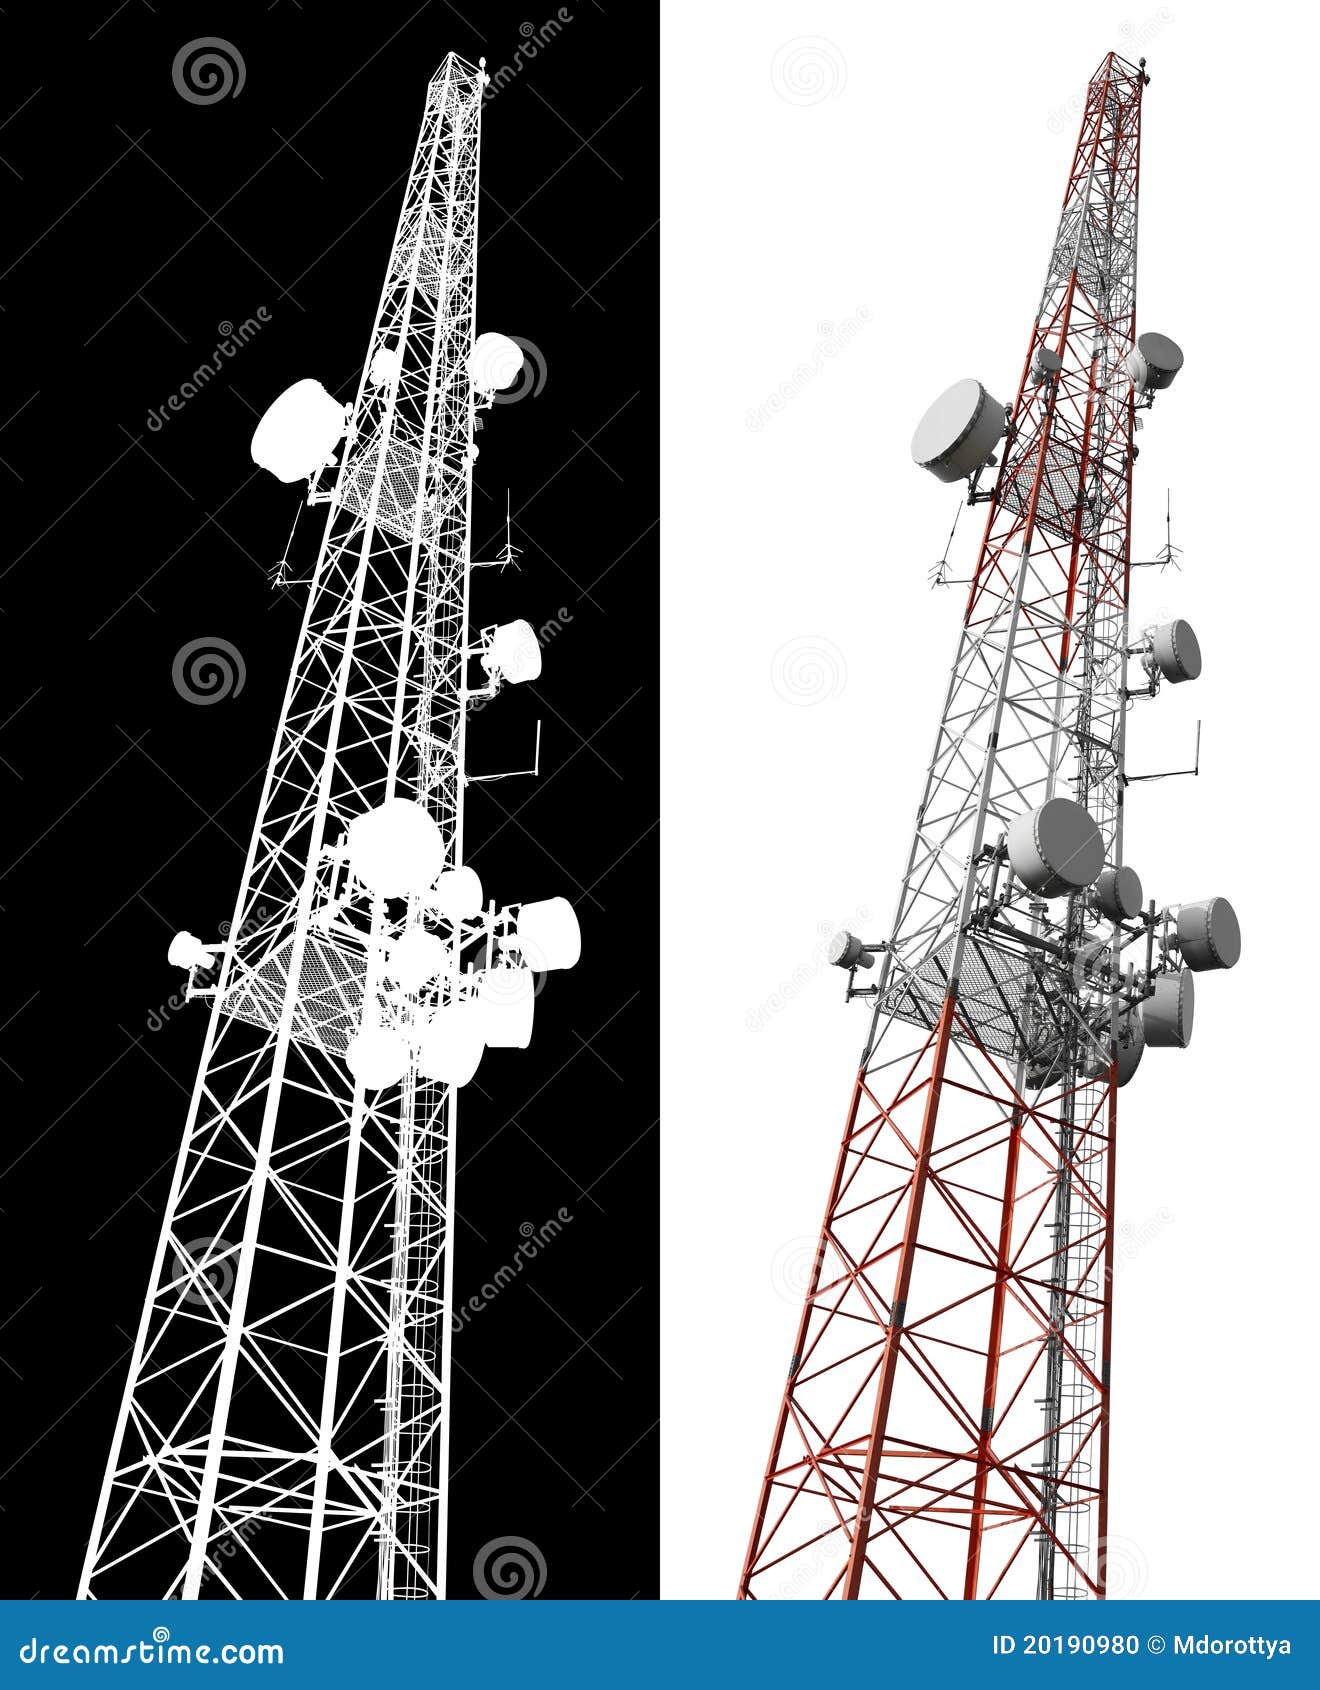 1500 Radio Tower Drawing Images Stock Photos  Vectors  Shutterstock